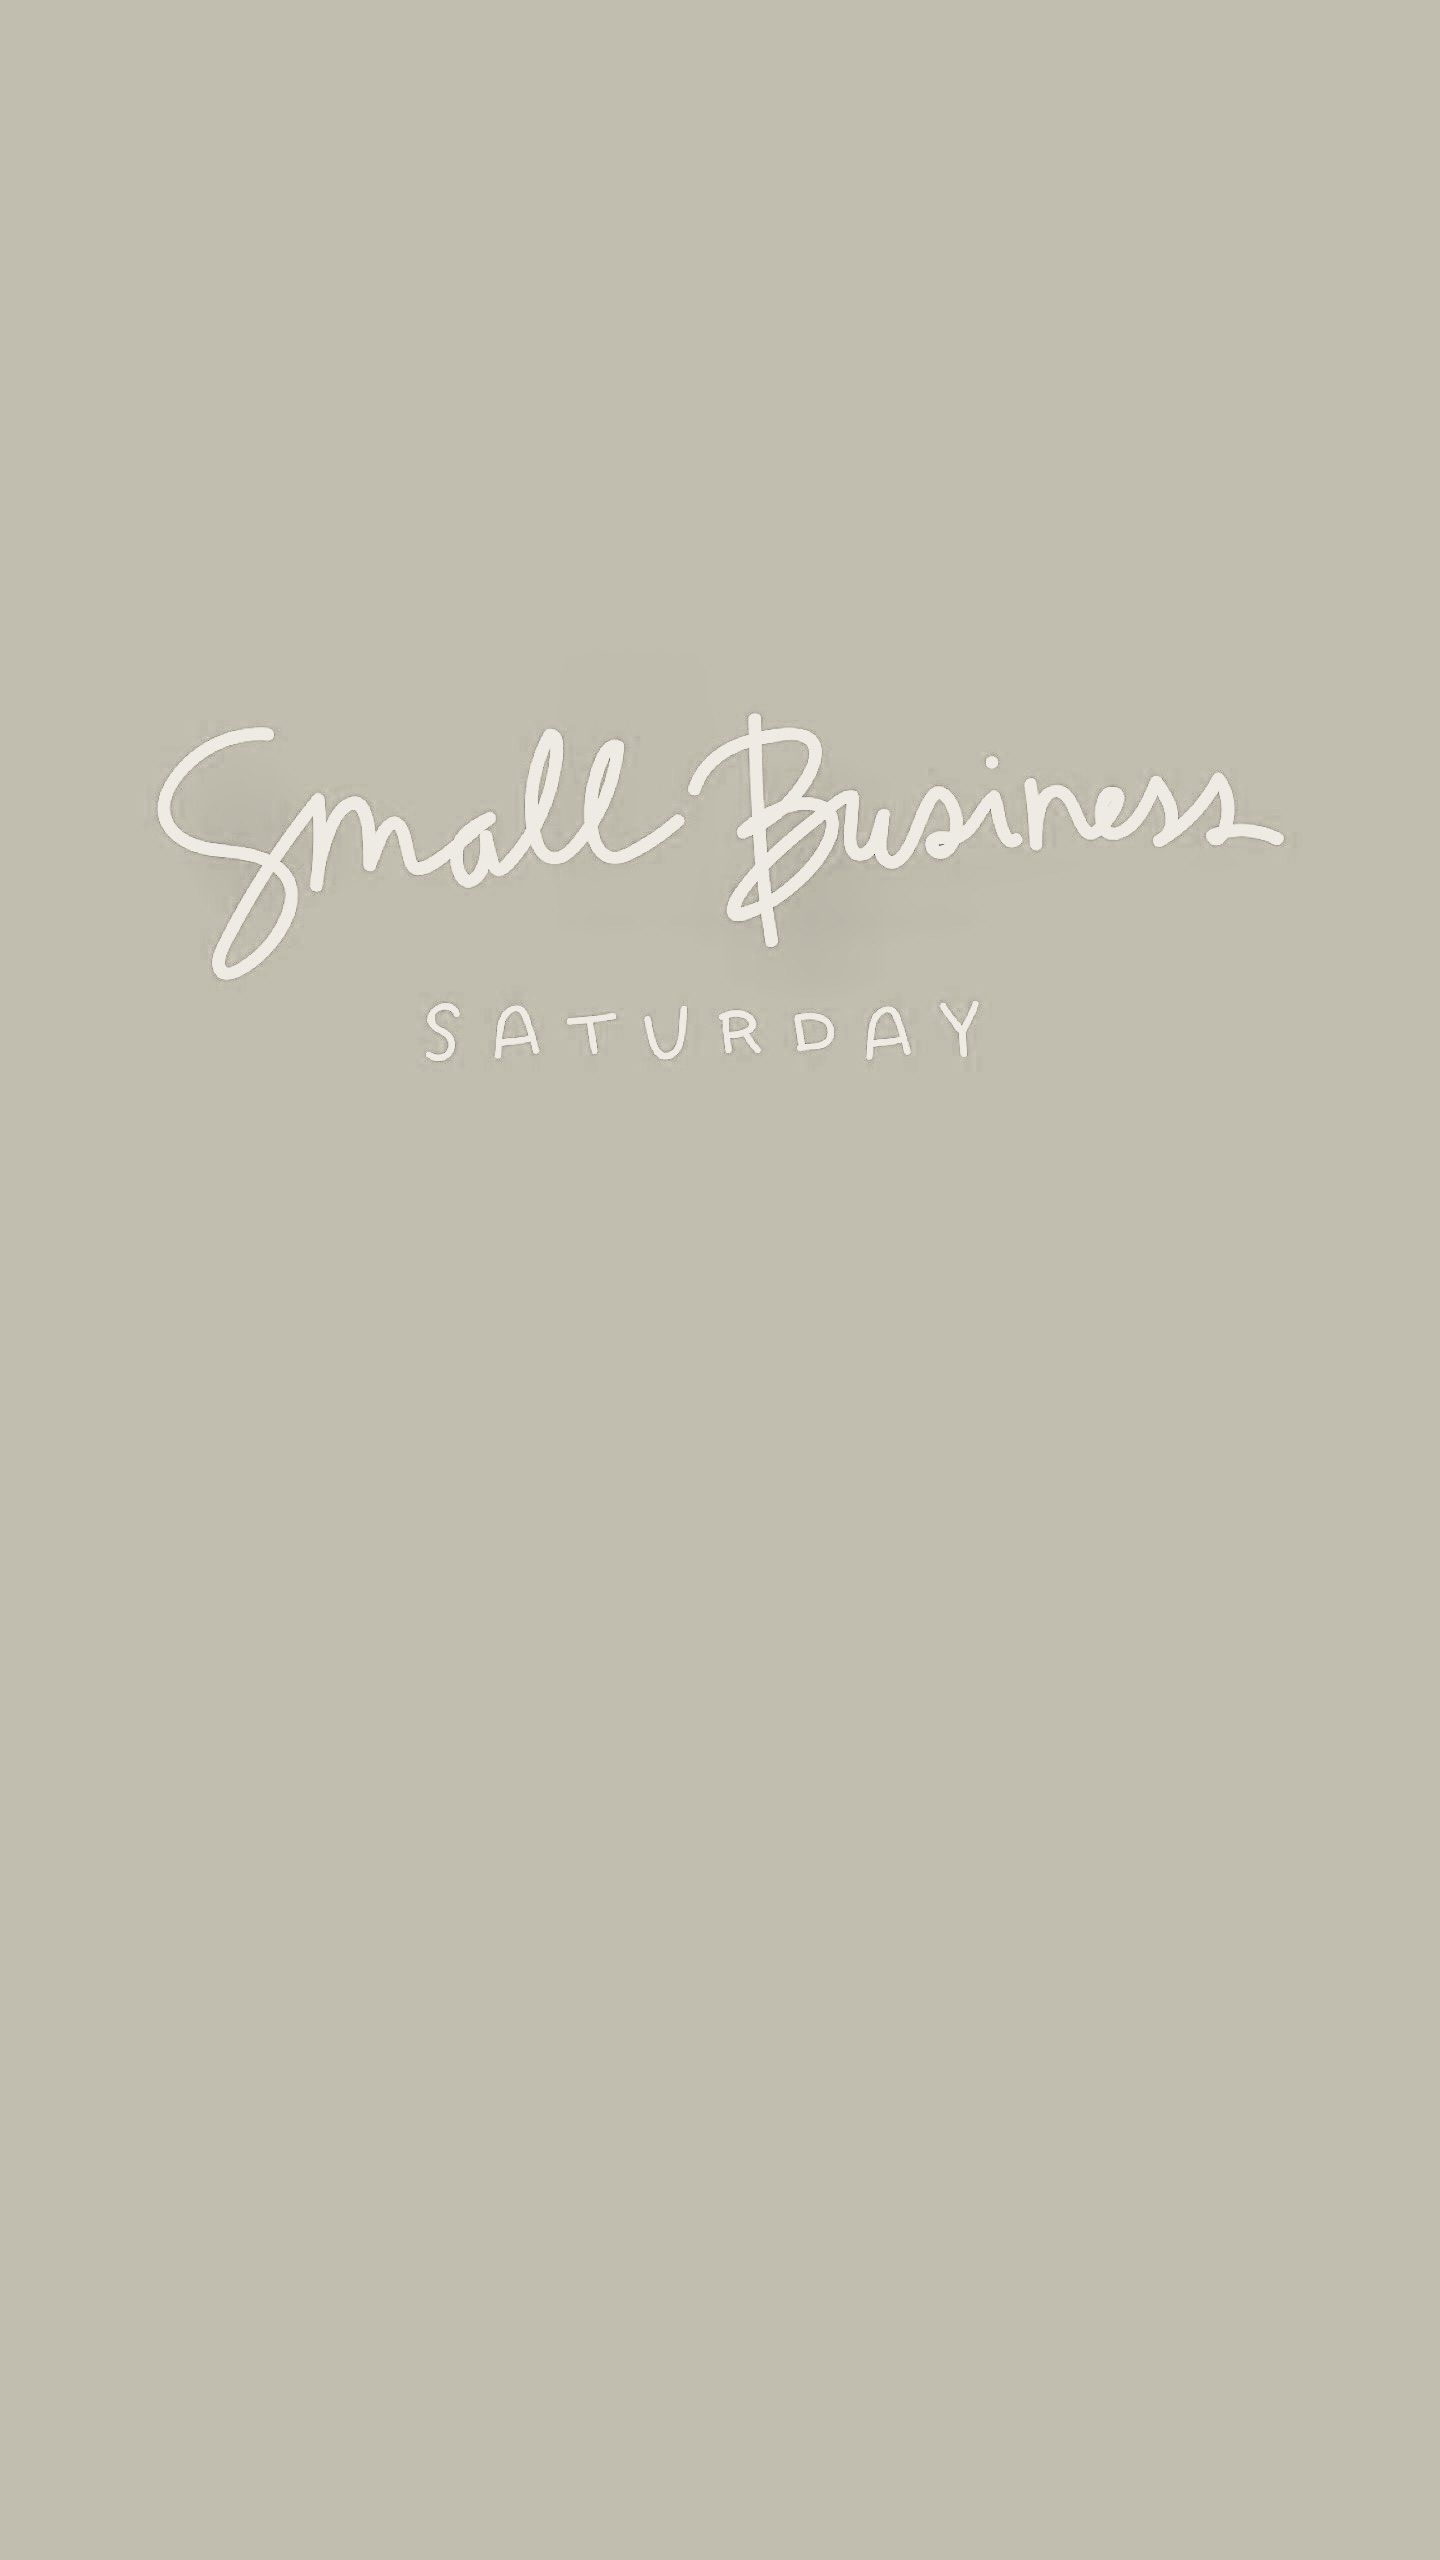 Small Business Wallpaper Free Small Business Background